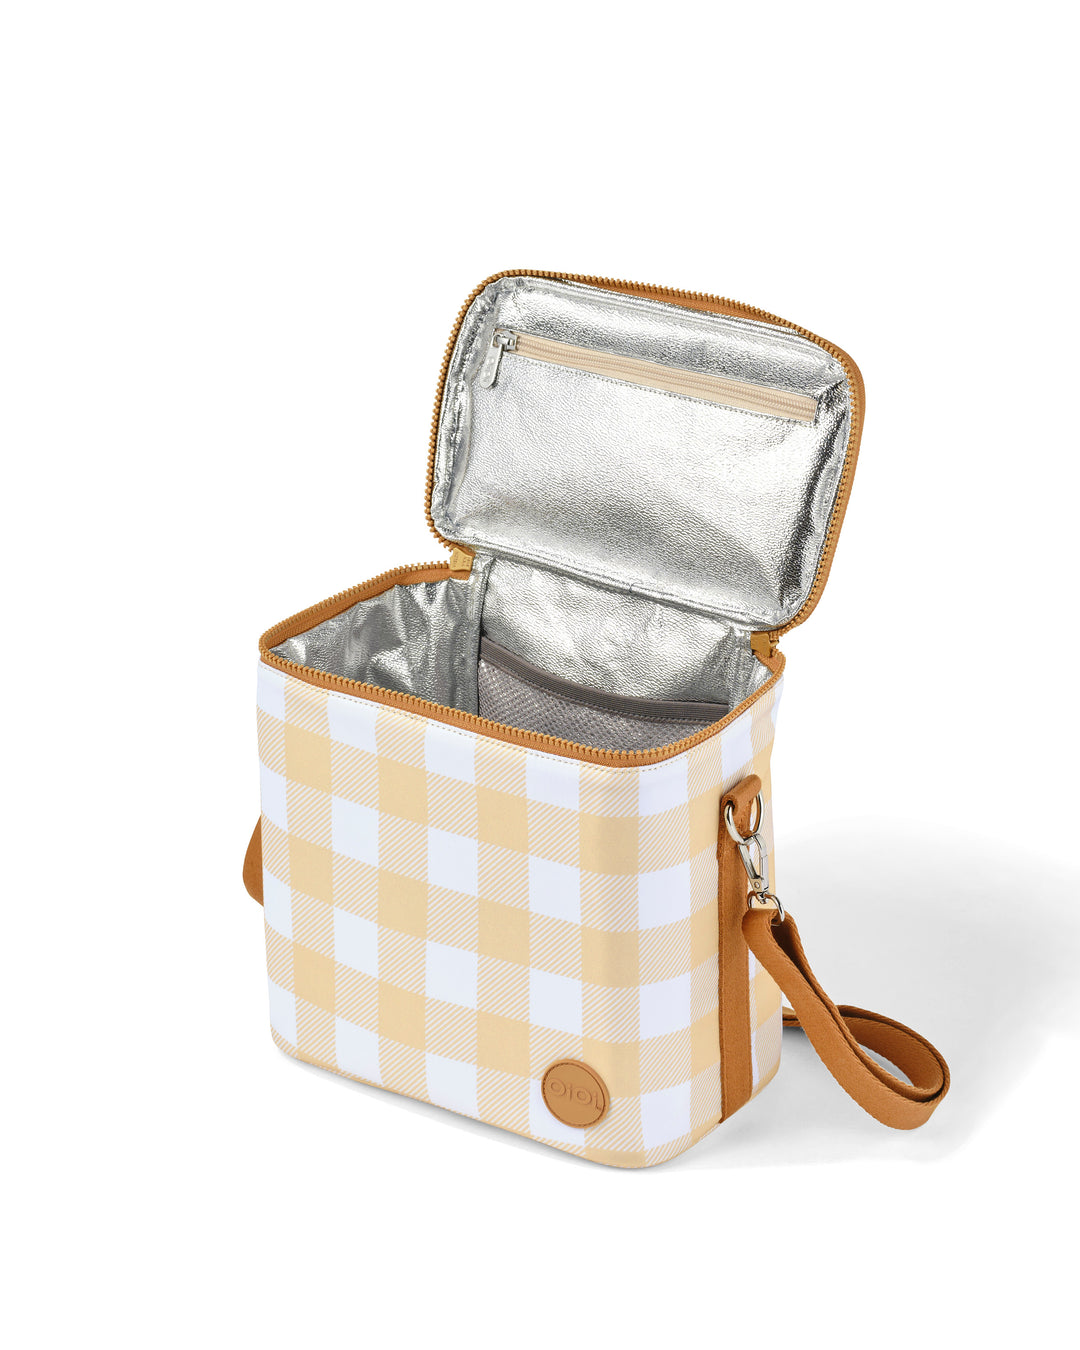 OiOi MIDI Insulated Lunch Bag - Gingham